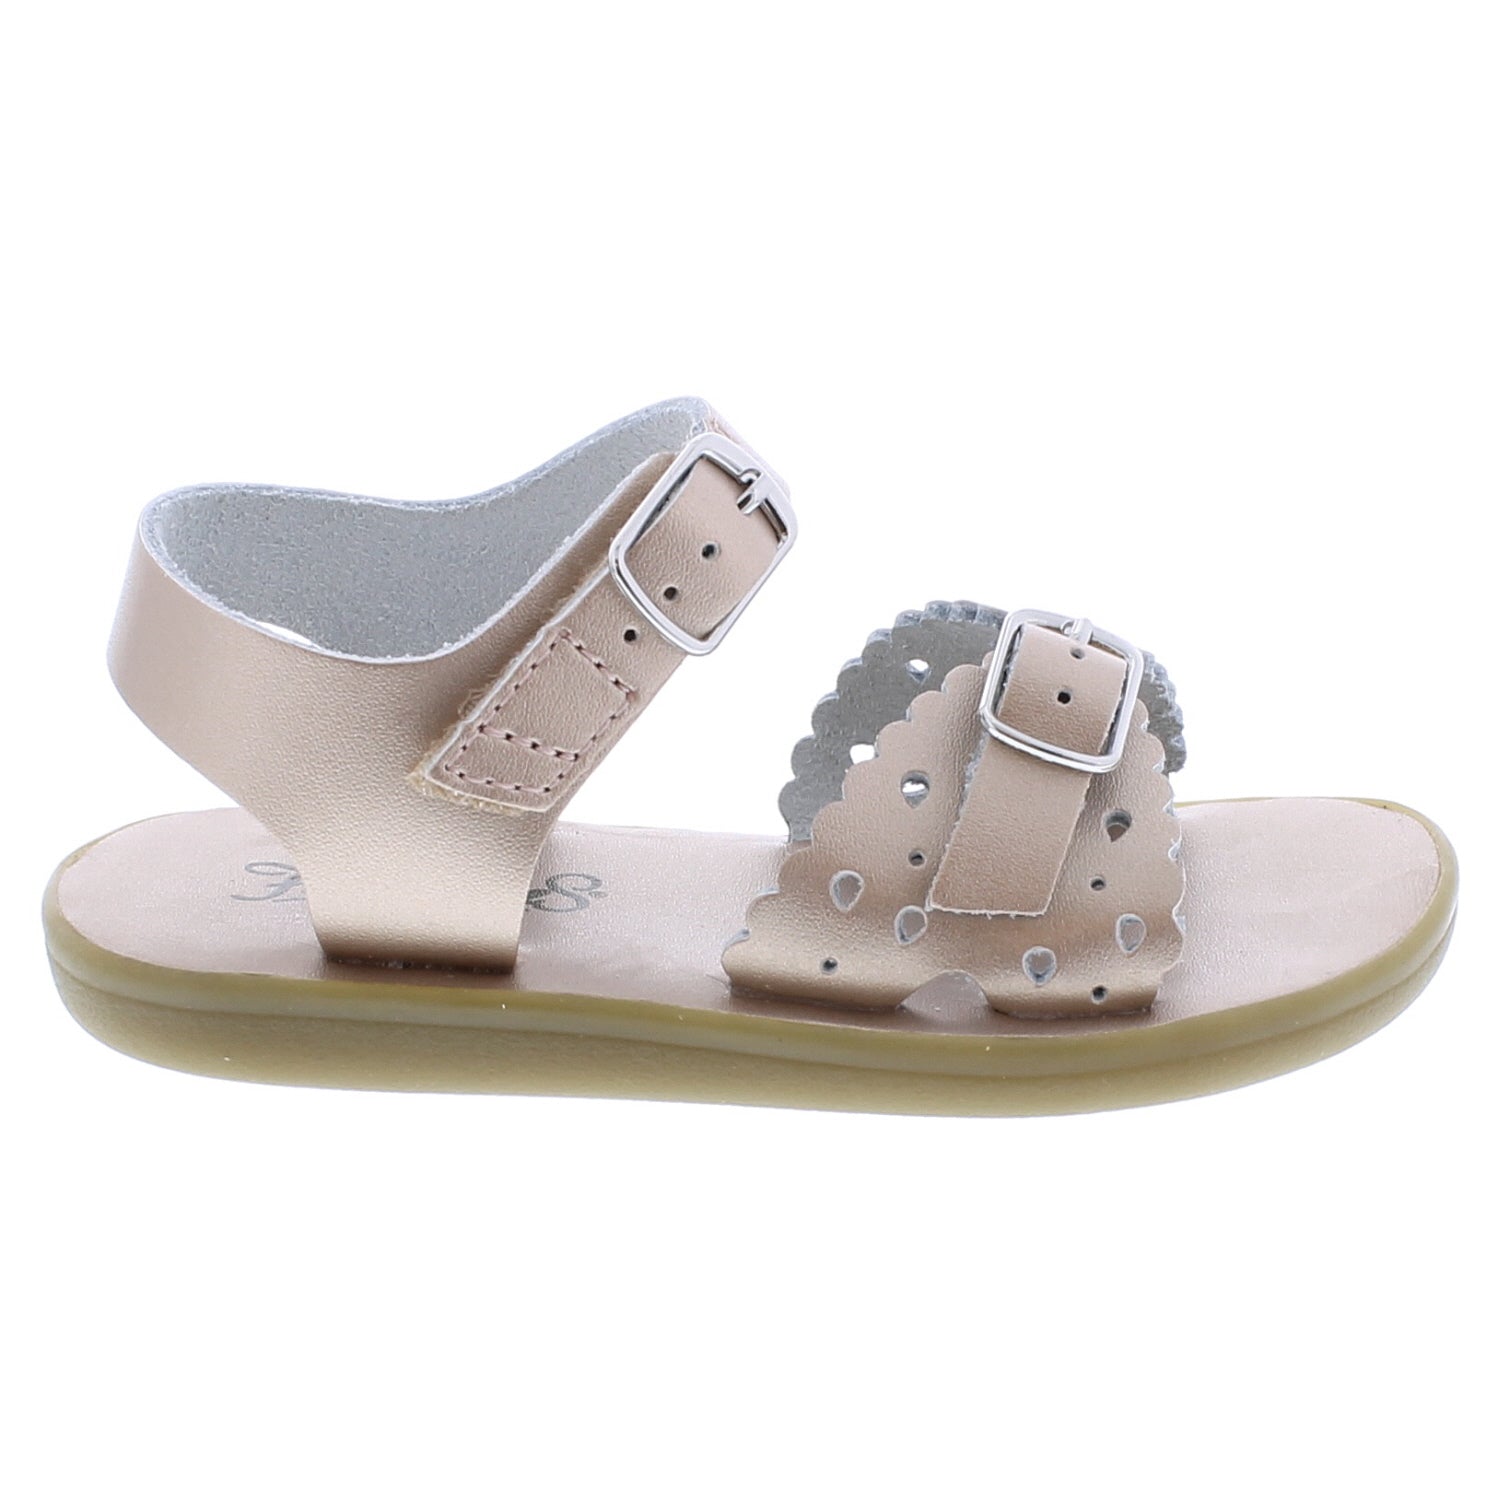 Ariel Casual Kid's Sandal - Rose Gold Leather